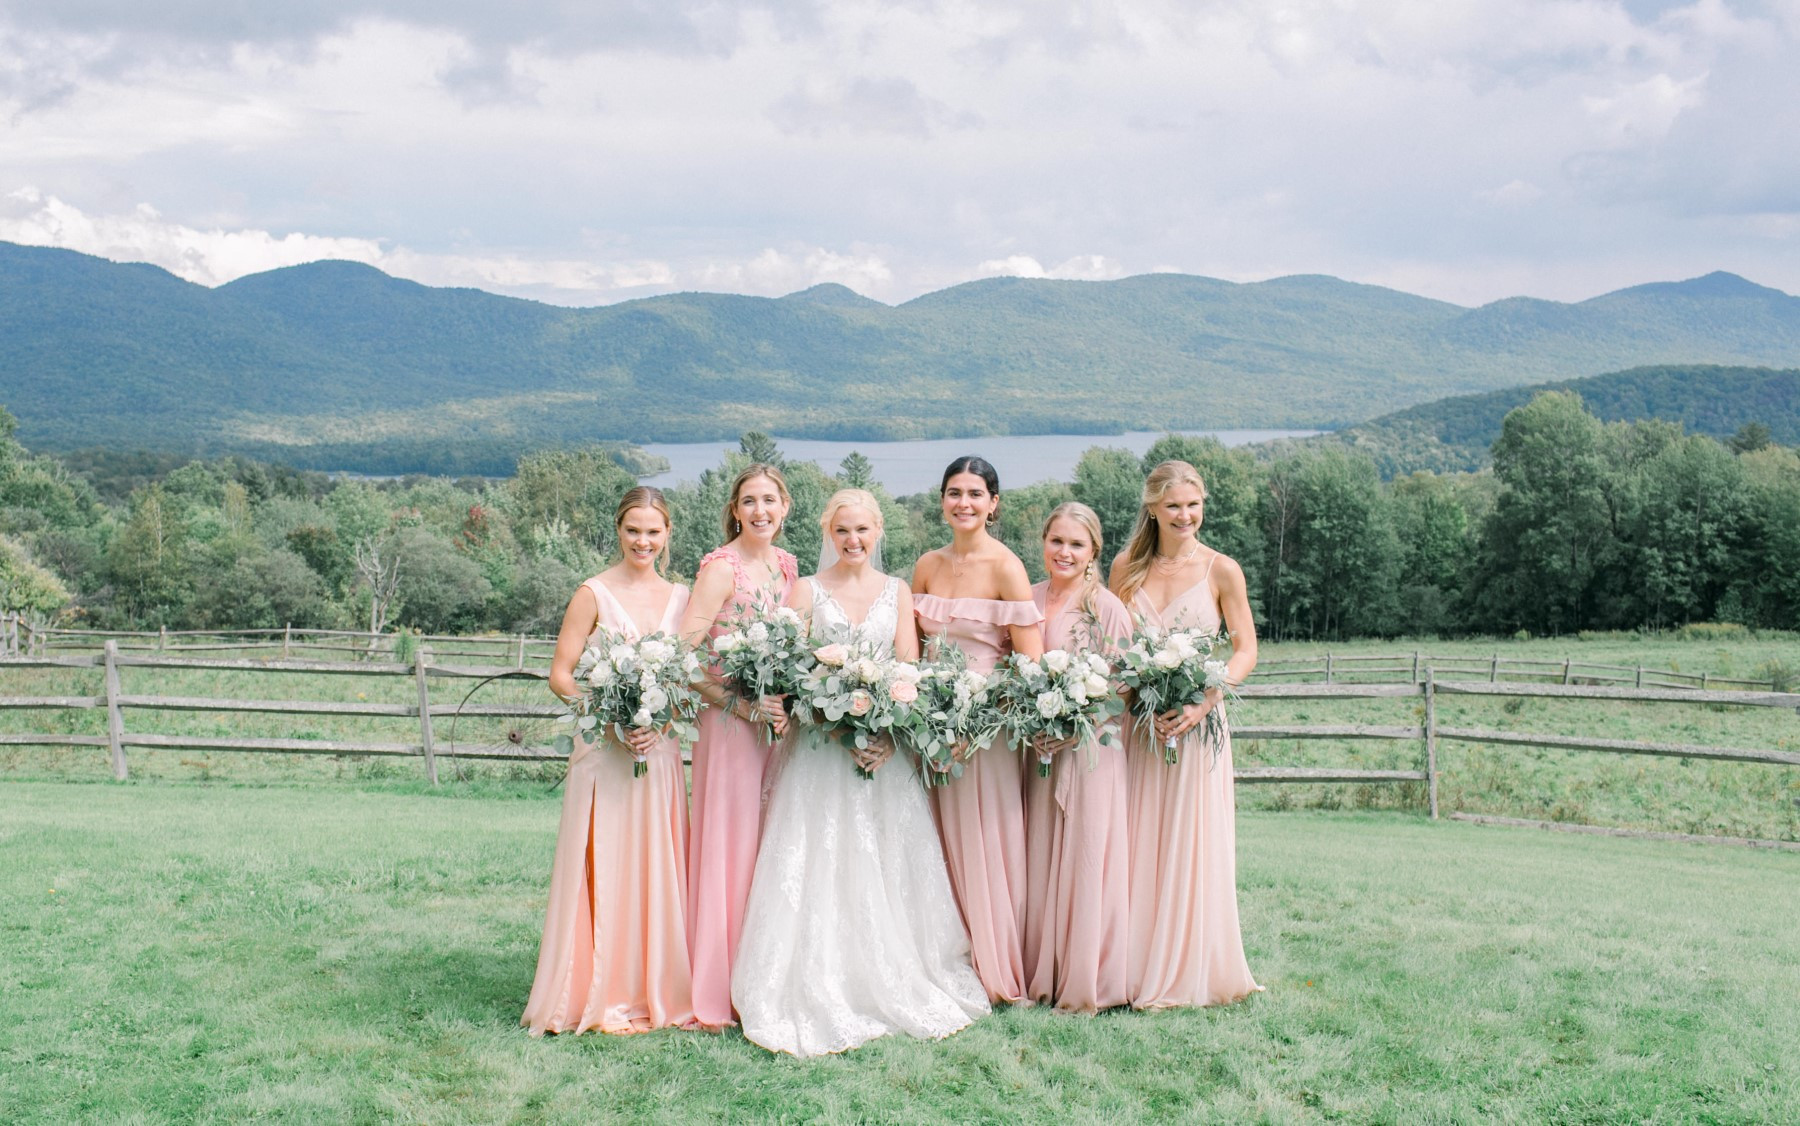 Bride in middle. 5 women in pink dresses, all carrying pink and white bouquets in front of lake and Green Mountains.